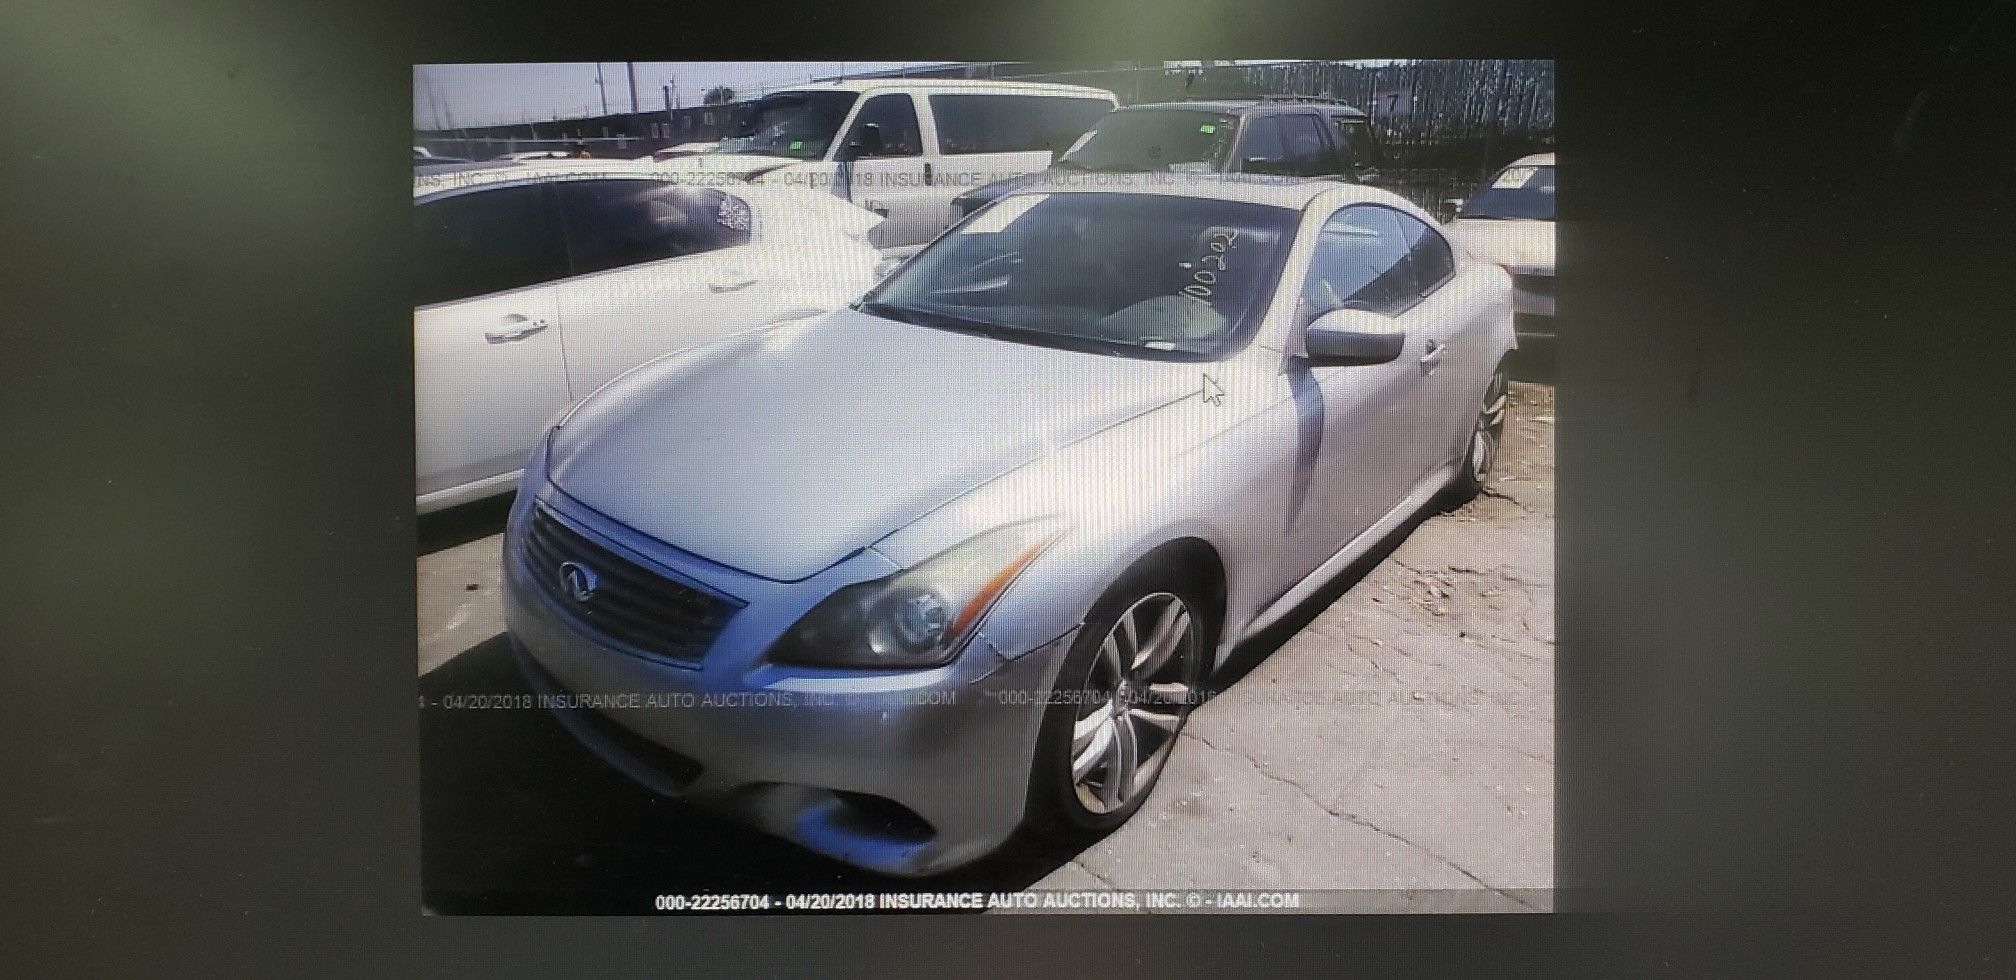 2008 Infiniti G37. ONLY FOR PARTS